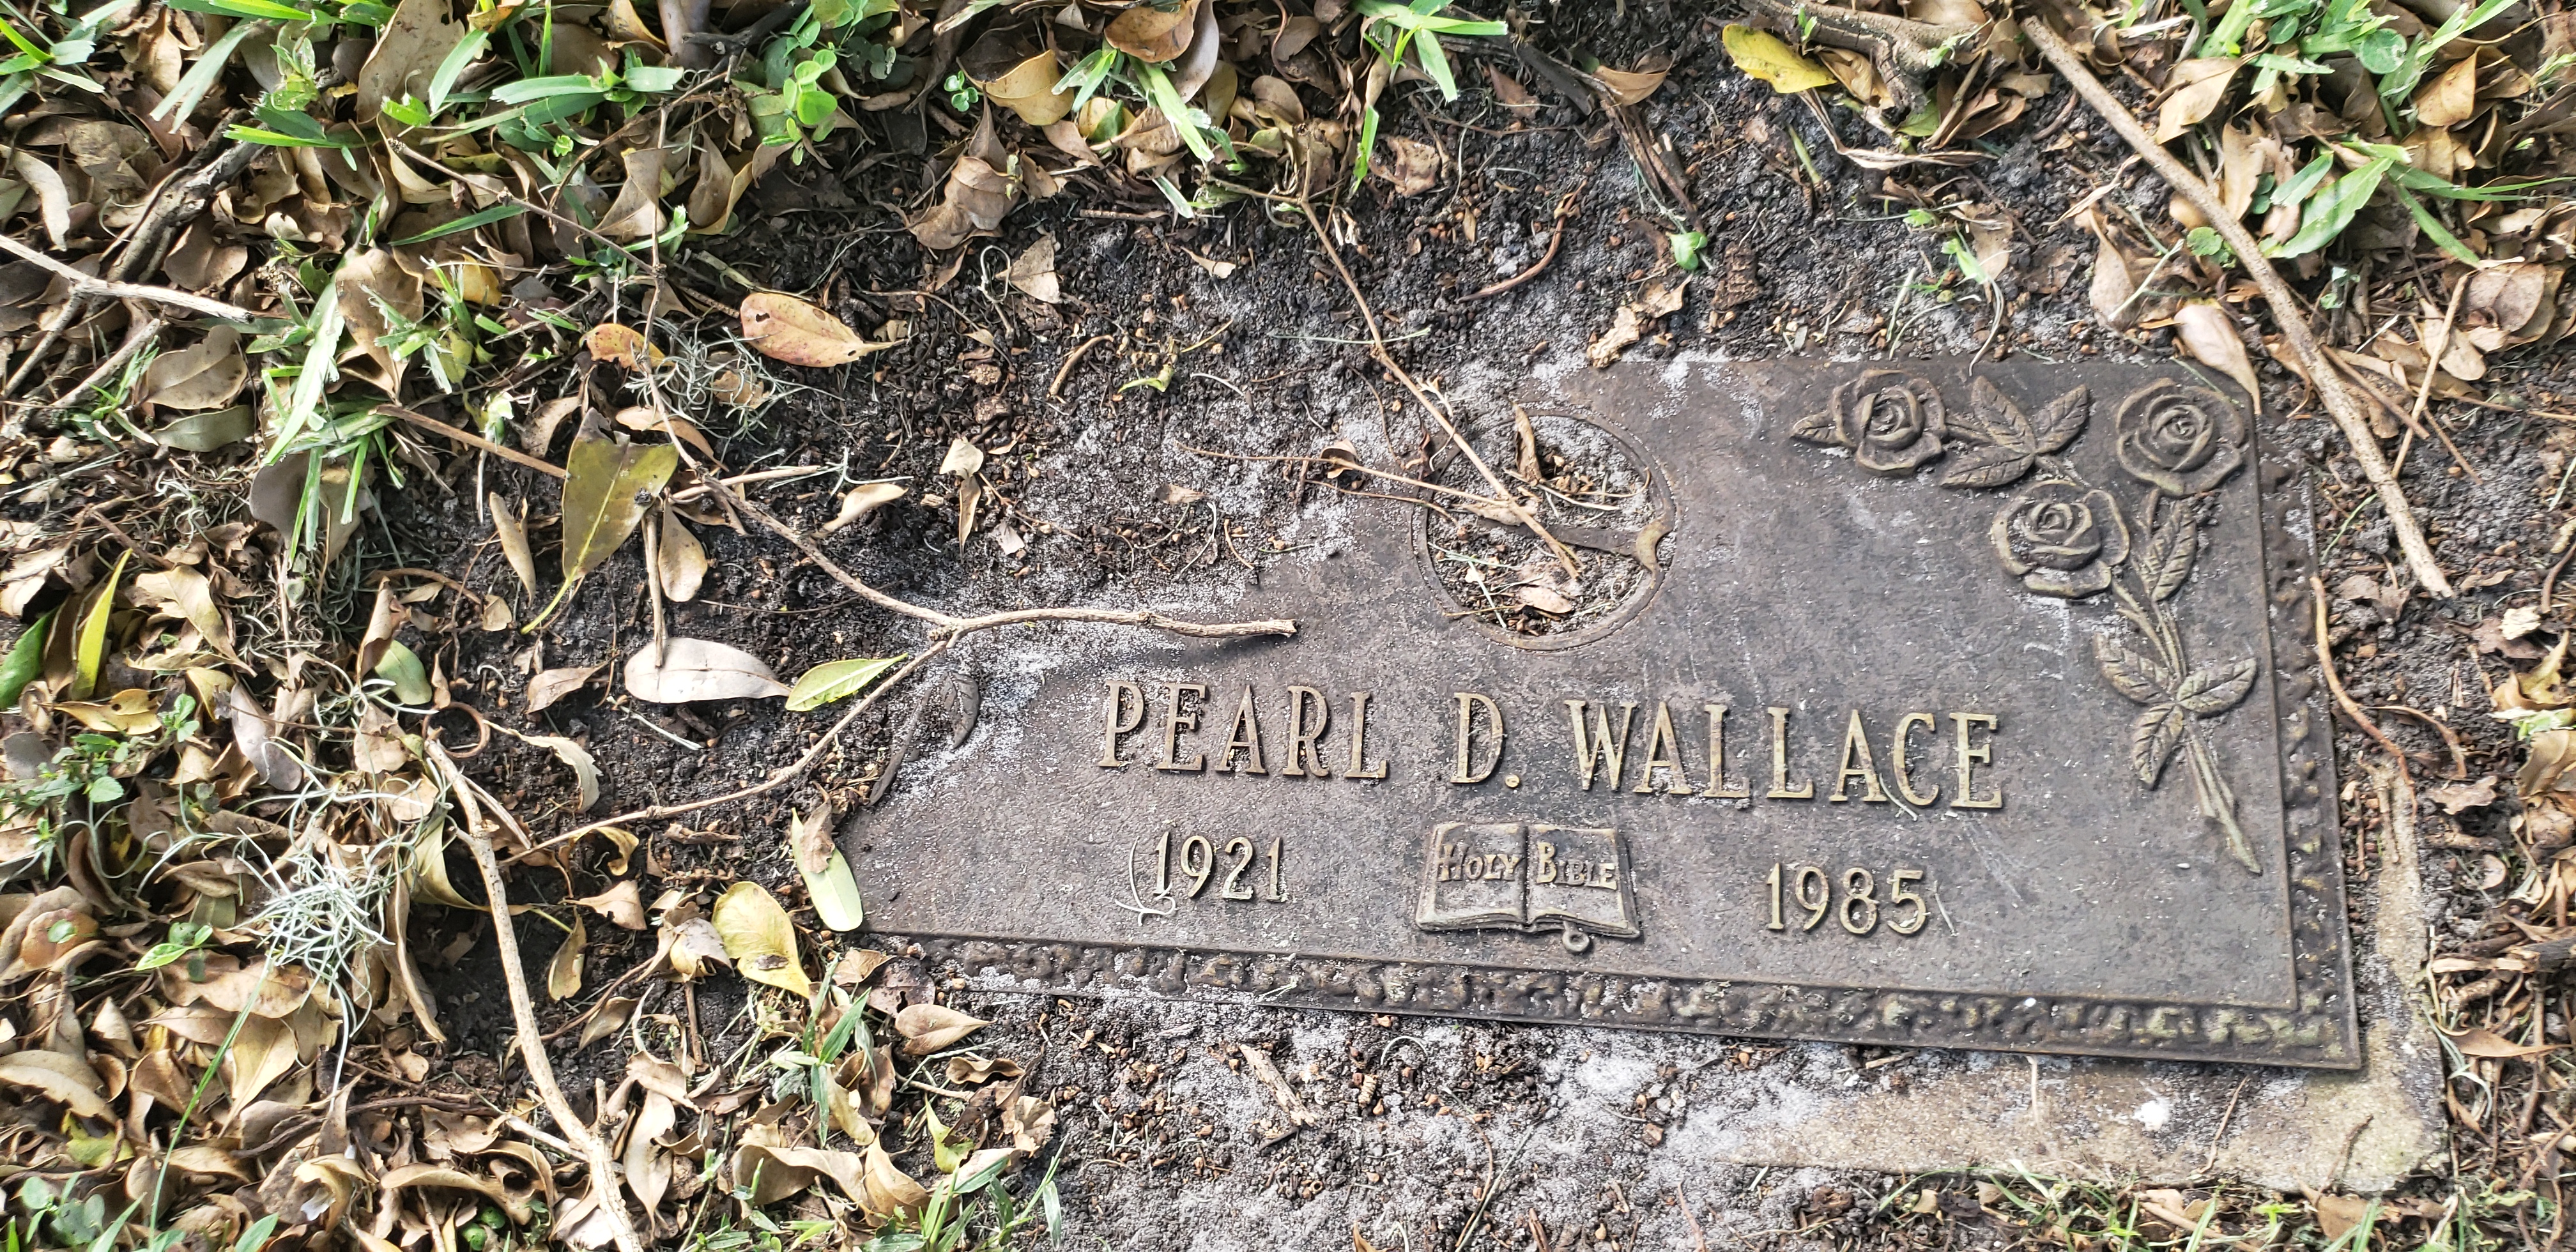 Pearl D Wallace